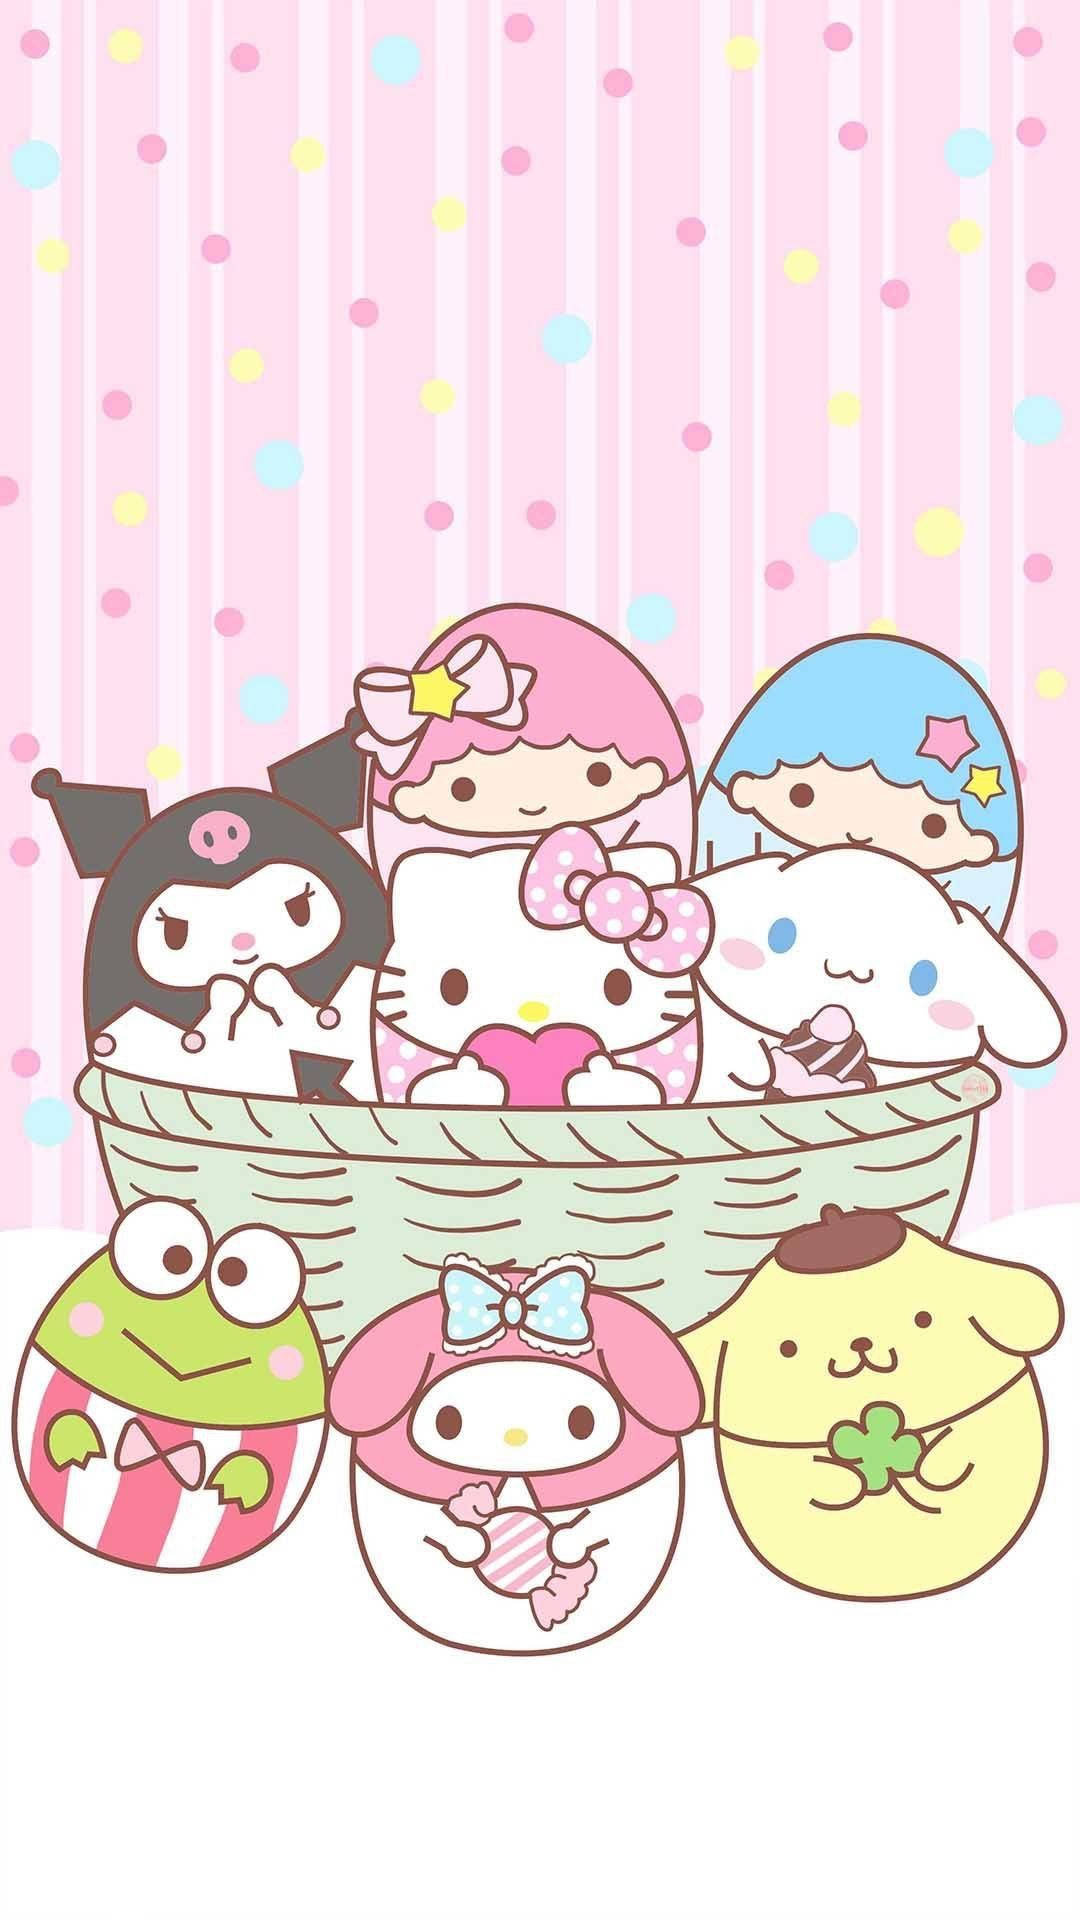 Sanrio Characters In A Basket Wallpaper